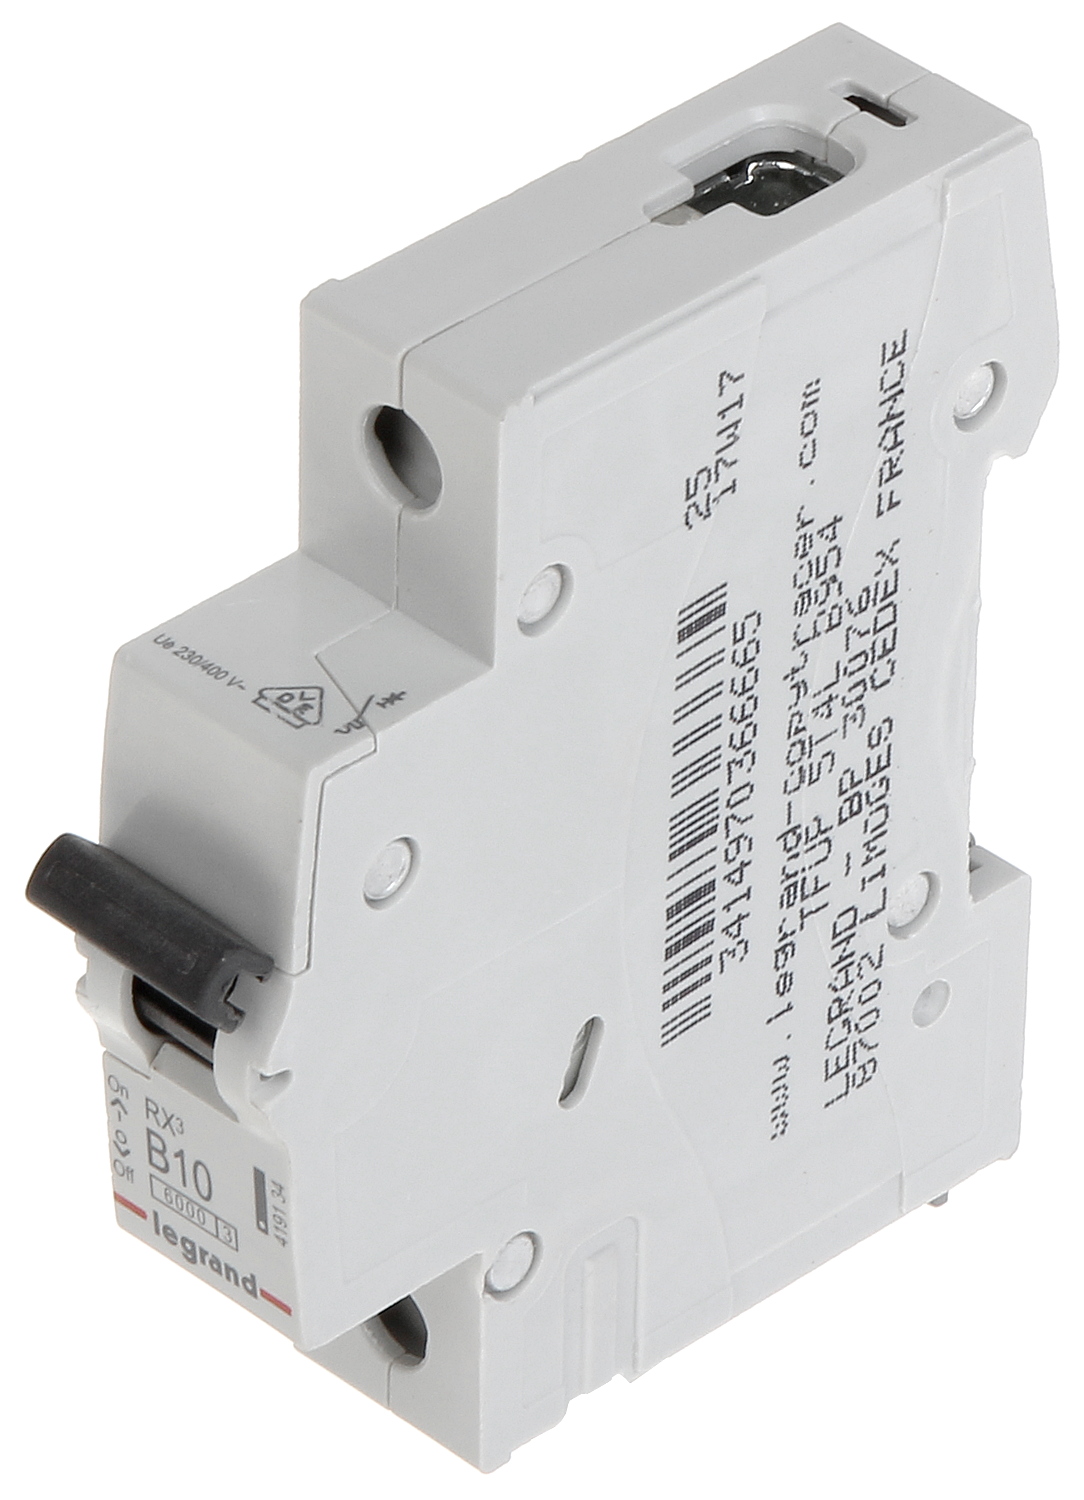 CIRCUIT BREAKER LE-419134 ONE-PHASE 10 A B TYPE LEGRAND - Circuit breakers  - Delta